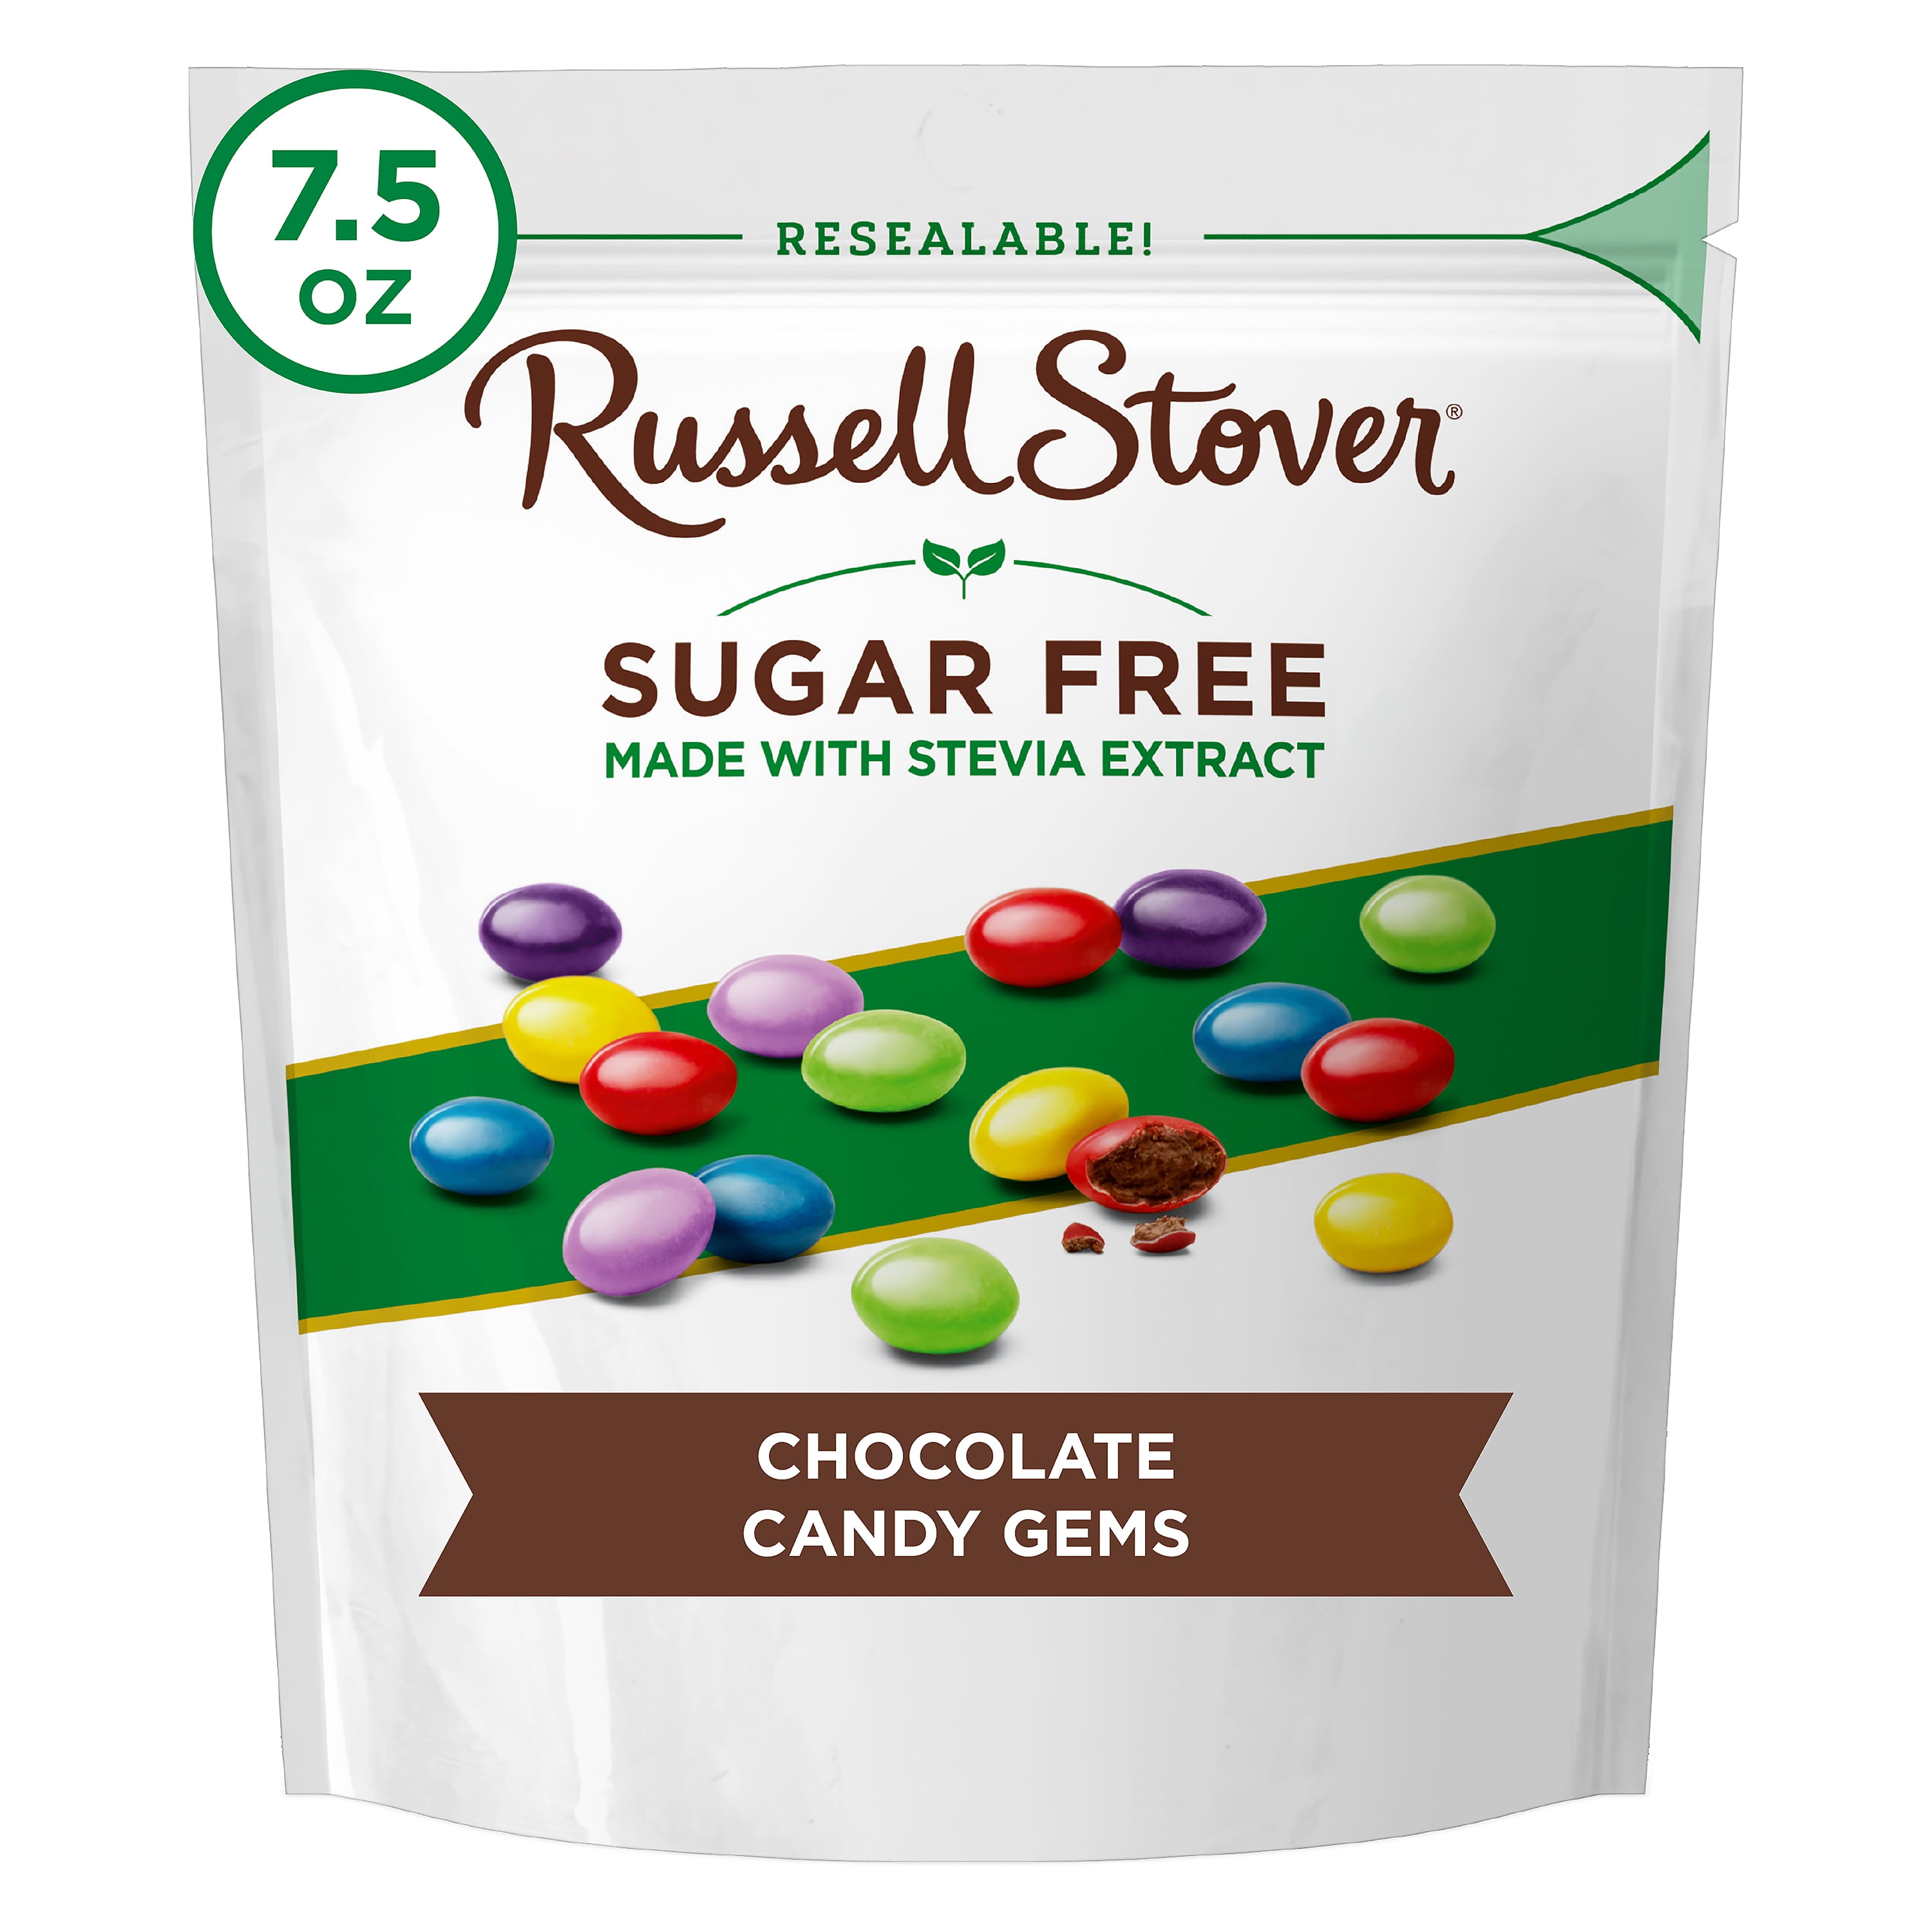 Russell Stover Sugar Free Chocolate Candy Gems, 7.5 oz